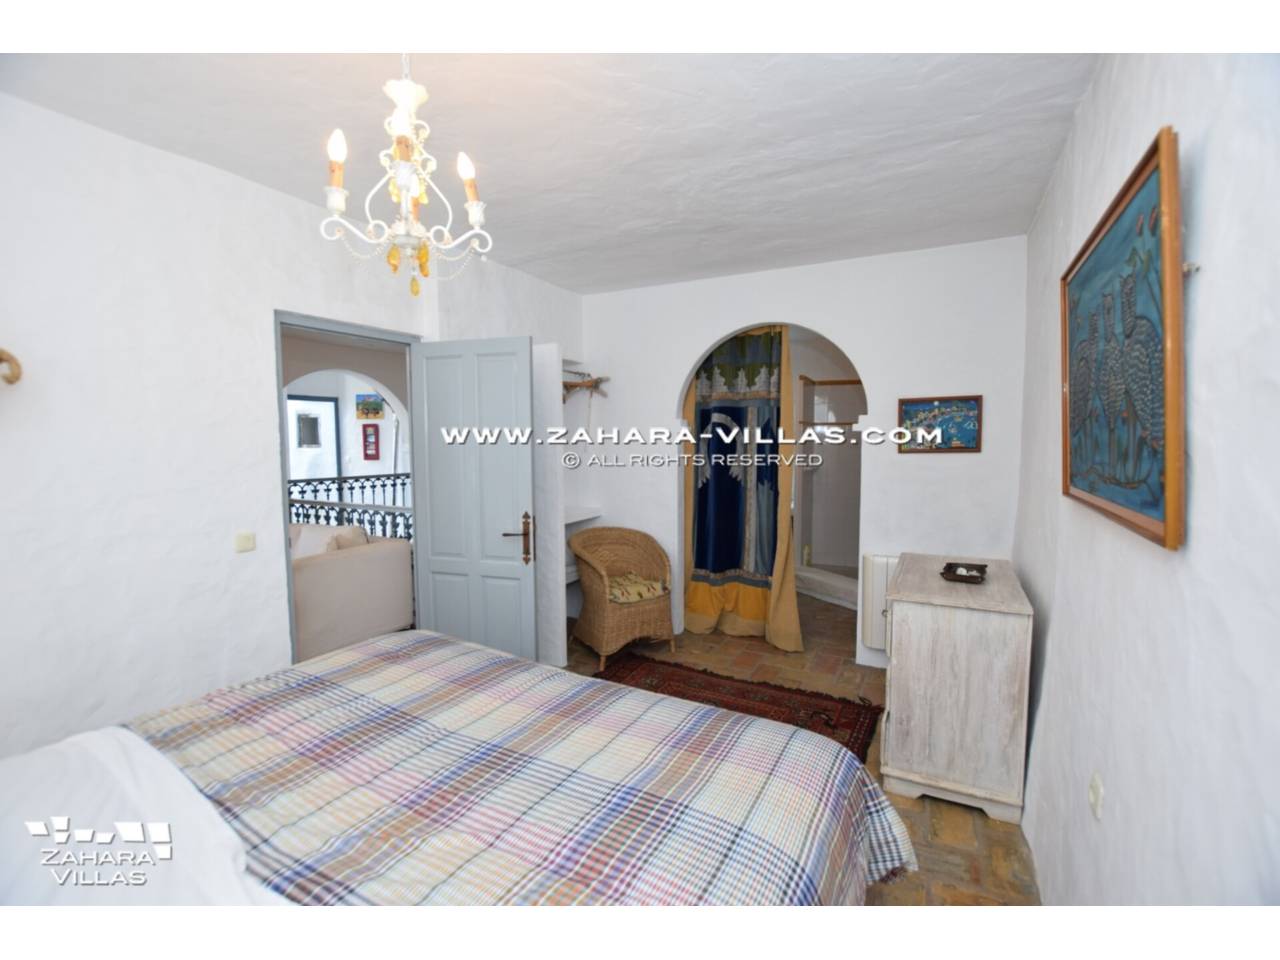 Imagen 47 de Magnificent House with central patio, in the historic center of the town